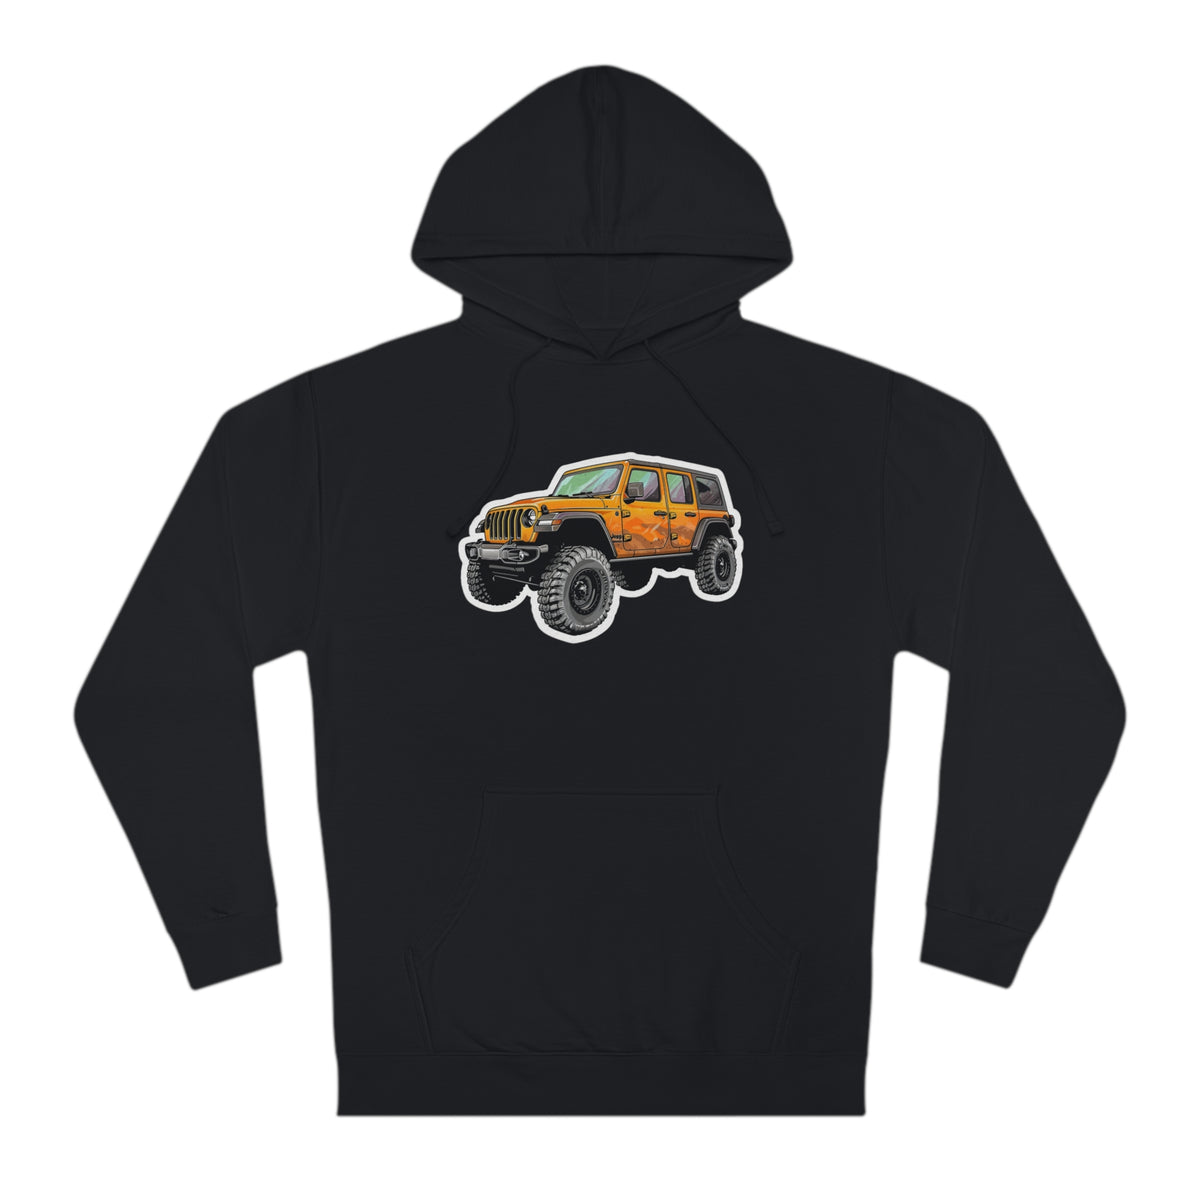 Trail Conqueror Hoodie with Dynamic Jeep Graphic Hooded Sweatshirt